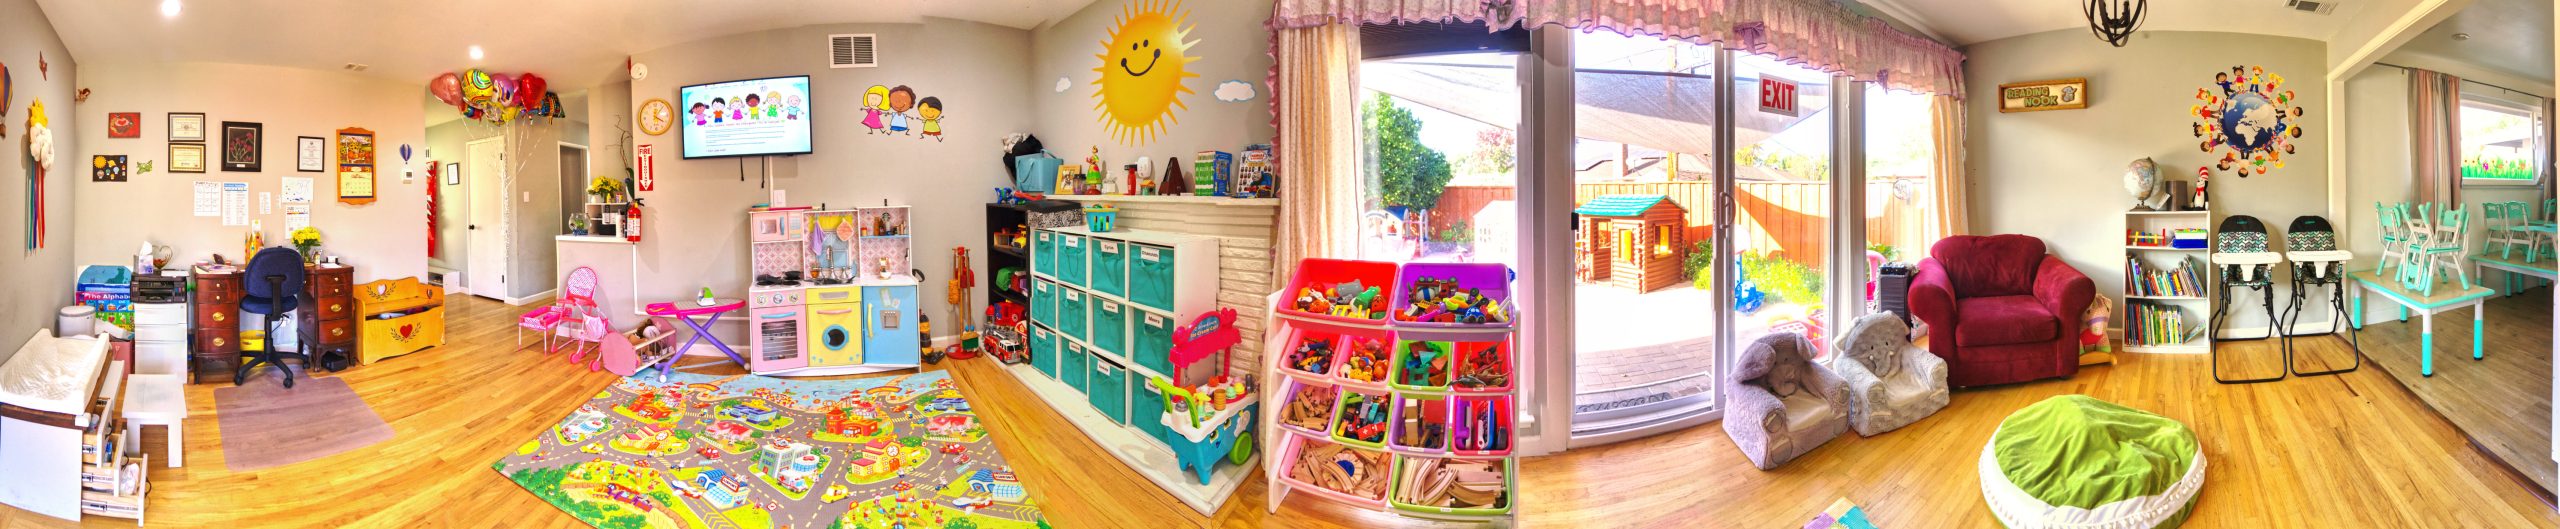 Miss Sunshine Daycare in Sunnyvale panoramic view